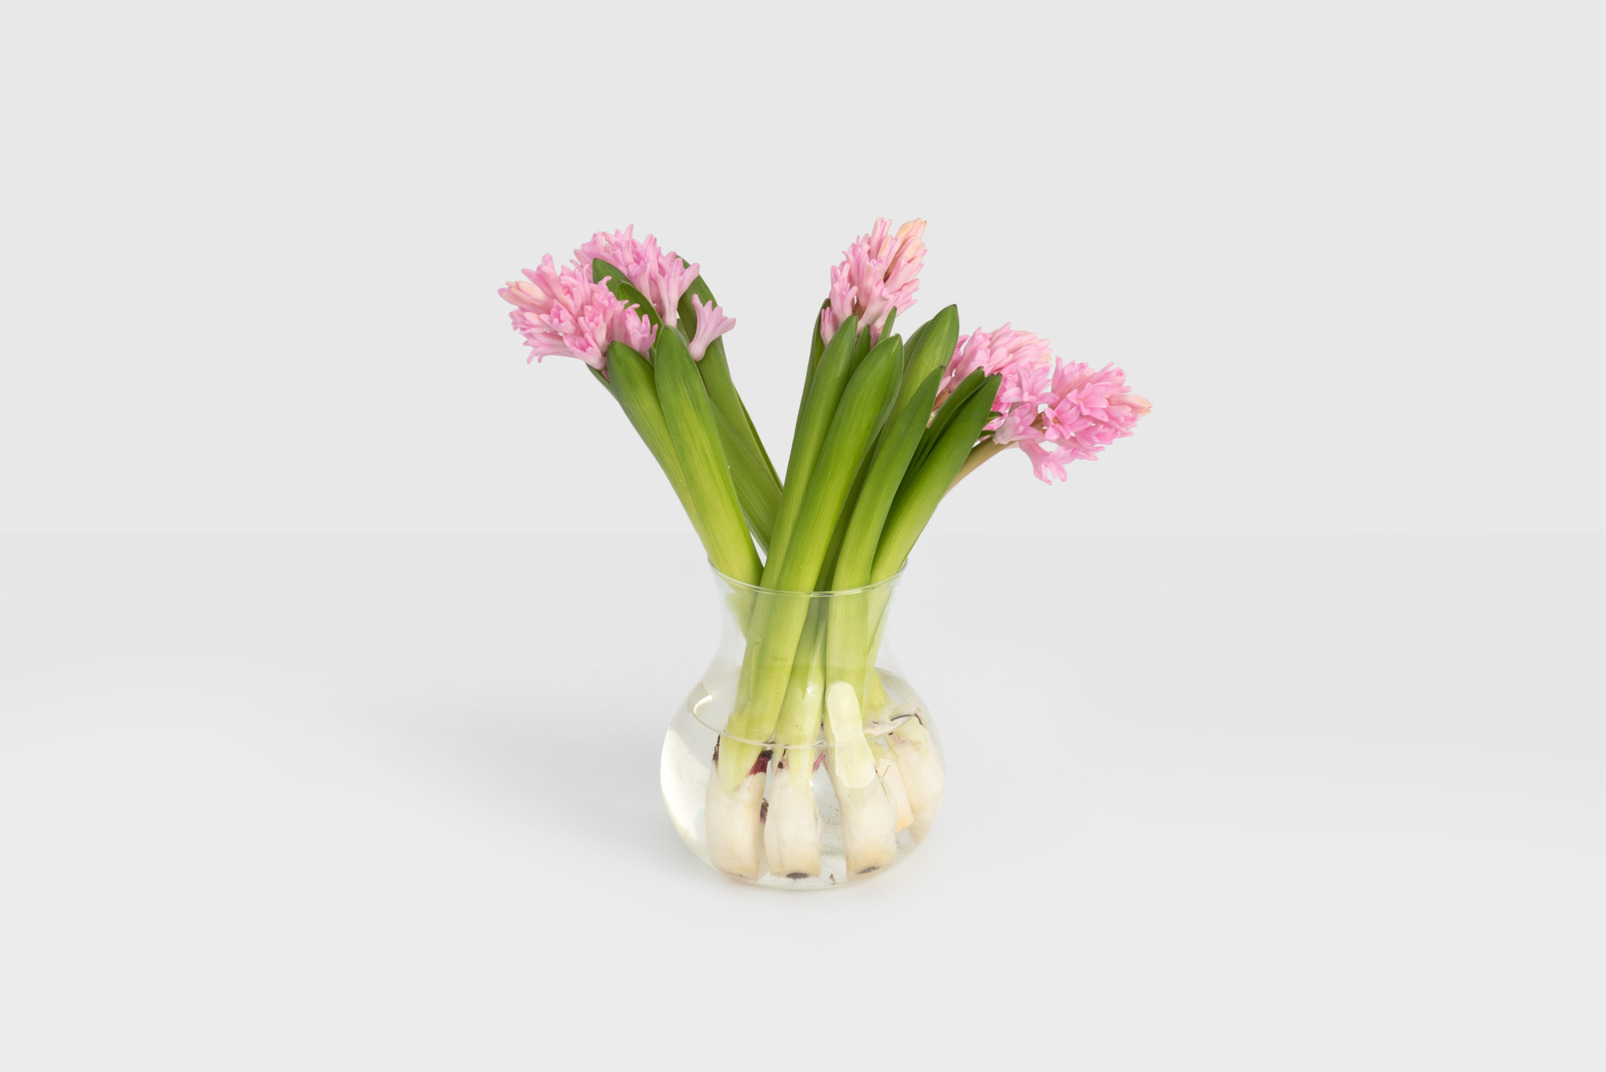 Pink hyacinths in clear glass vase